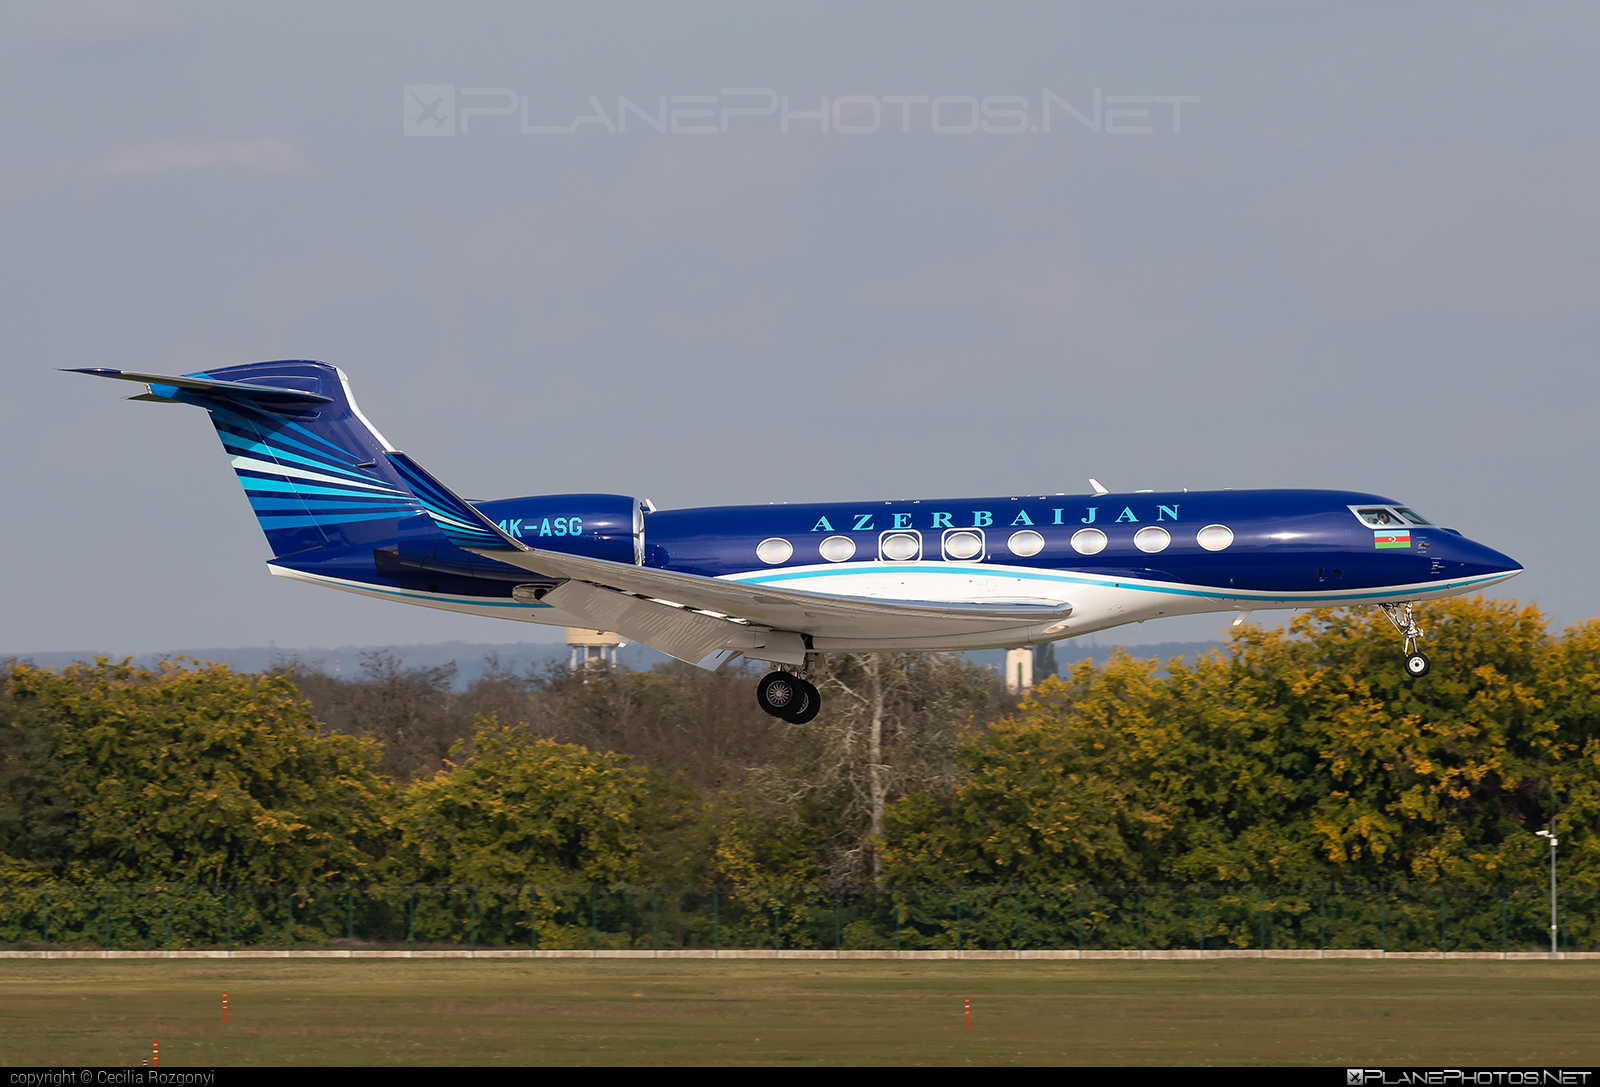 Gulfstream G650 - 4K-ASG operated by ASG Business Aviation #asgBusinessAviation #gulfstream #gulfstream650 #gulfstreamg650 #gulfstreamgvi